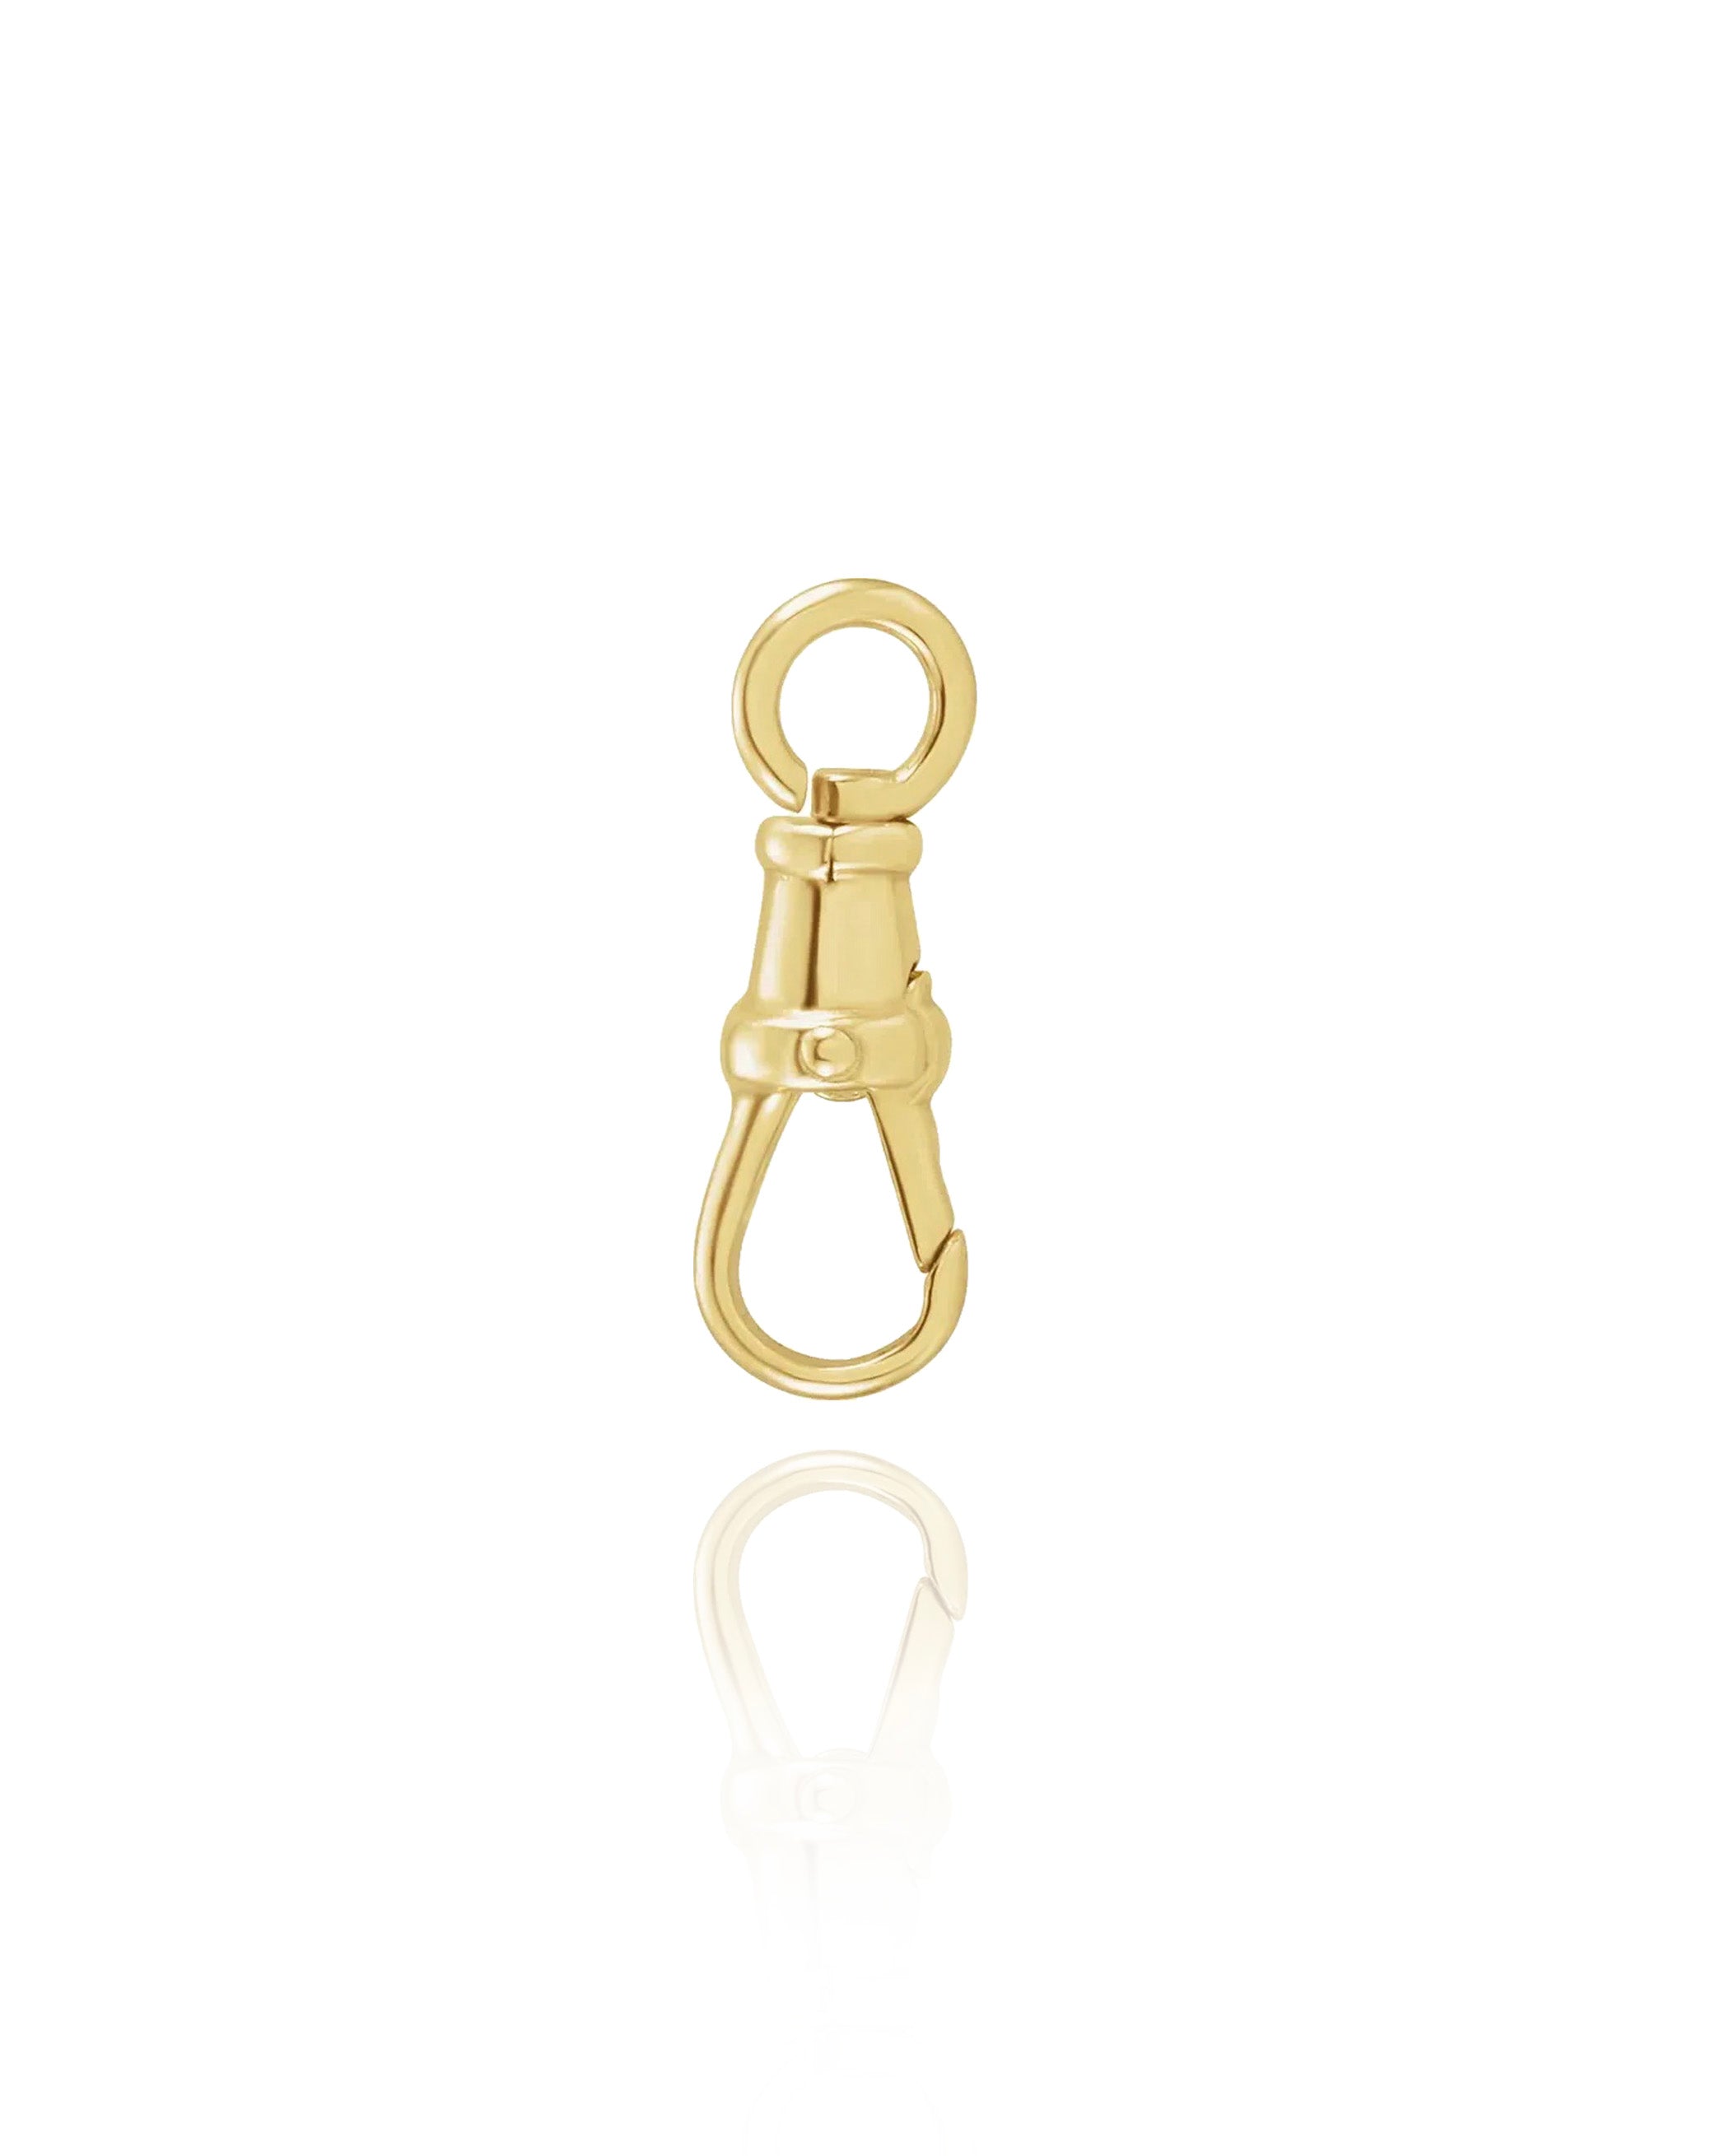 Weathered Gold Lobster Clasp with Rounded Swivel Bottom - 2.875 x 0.875